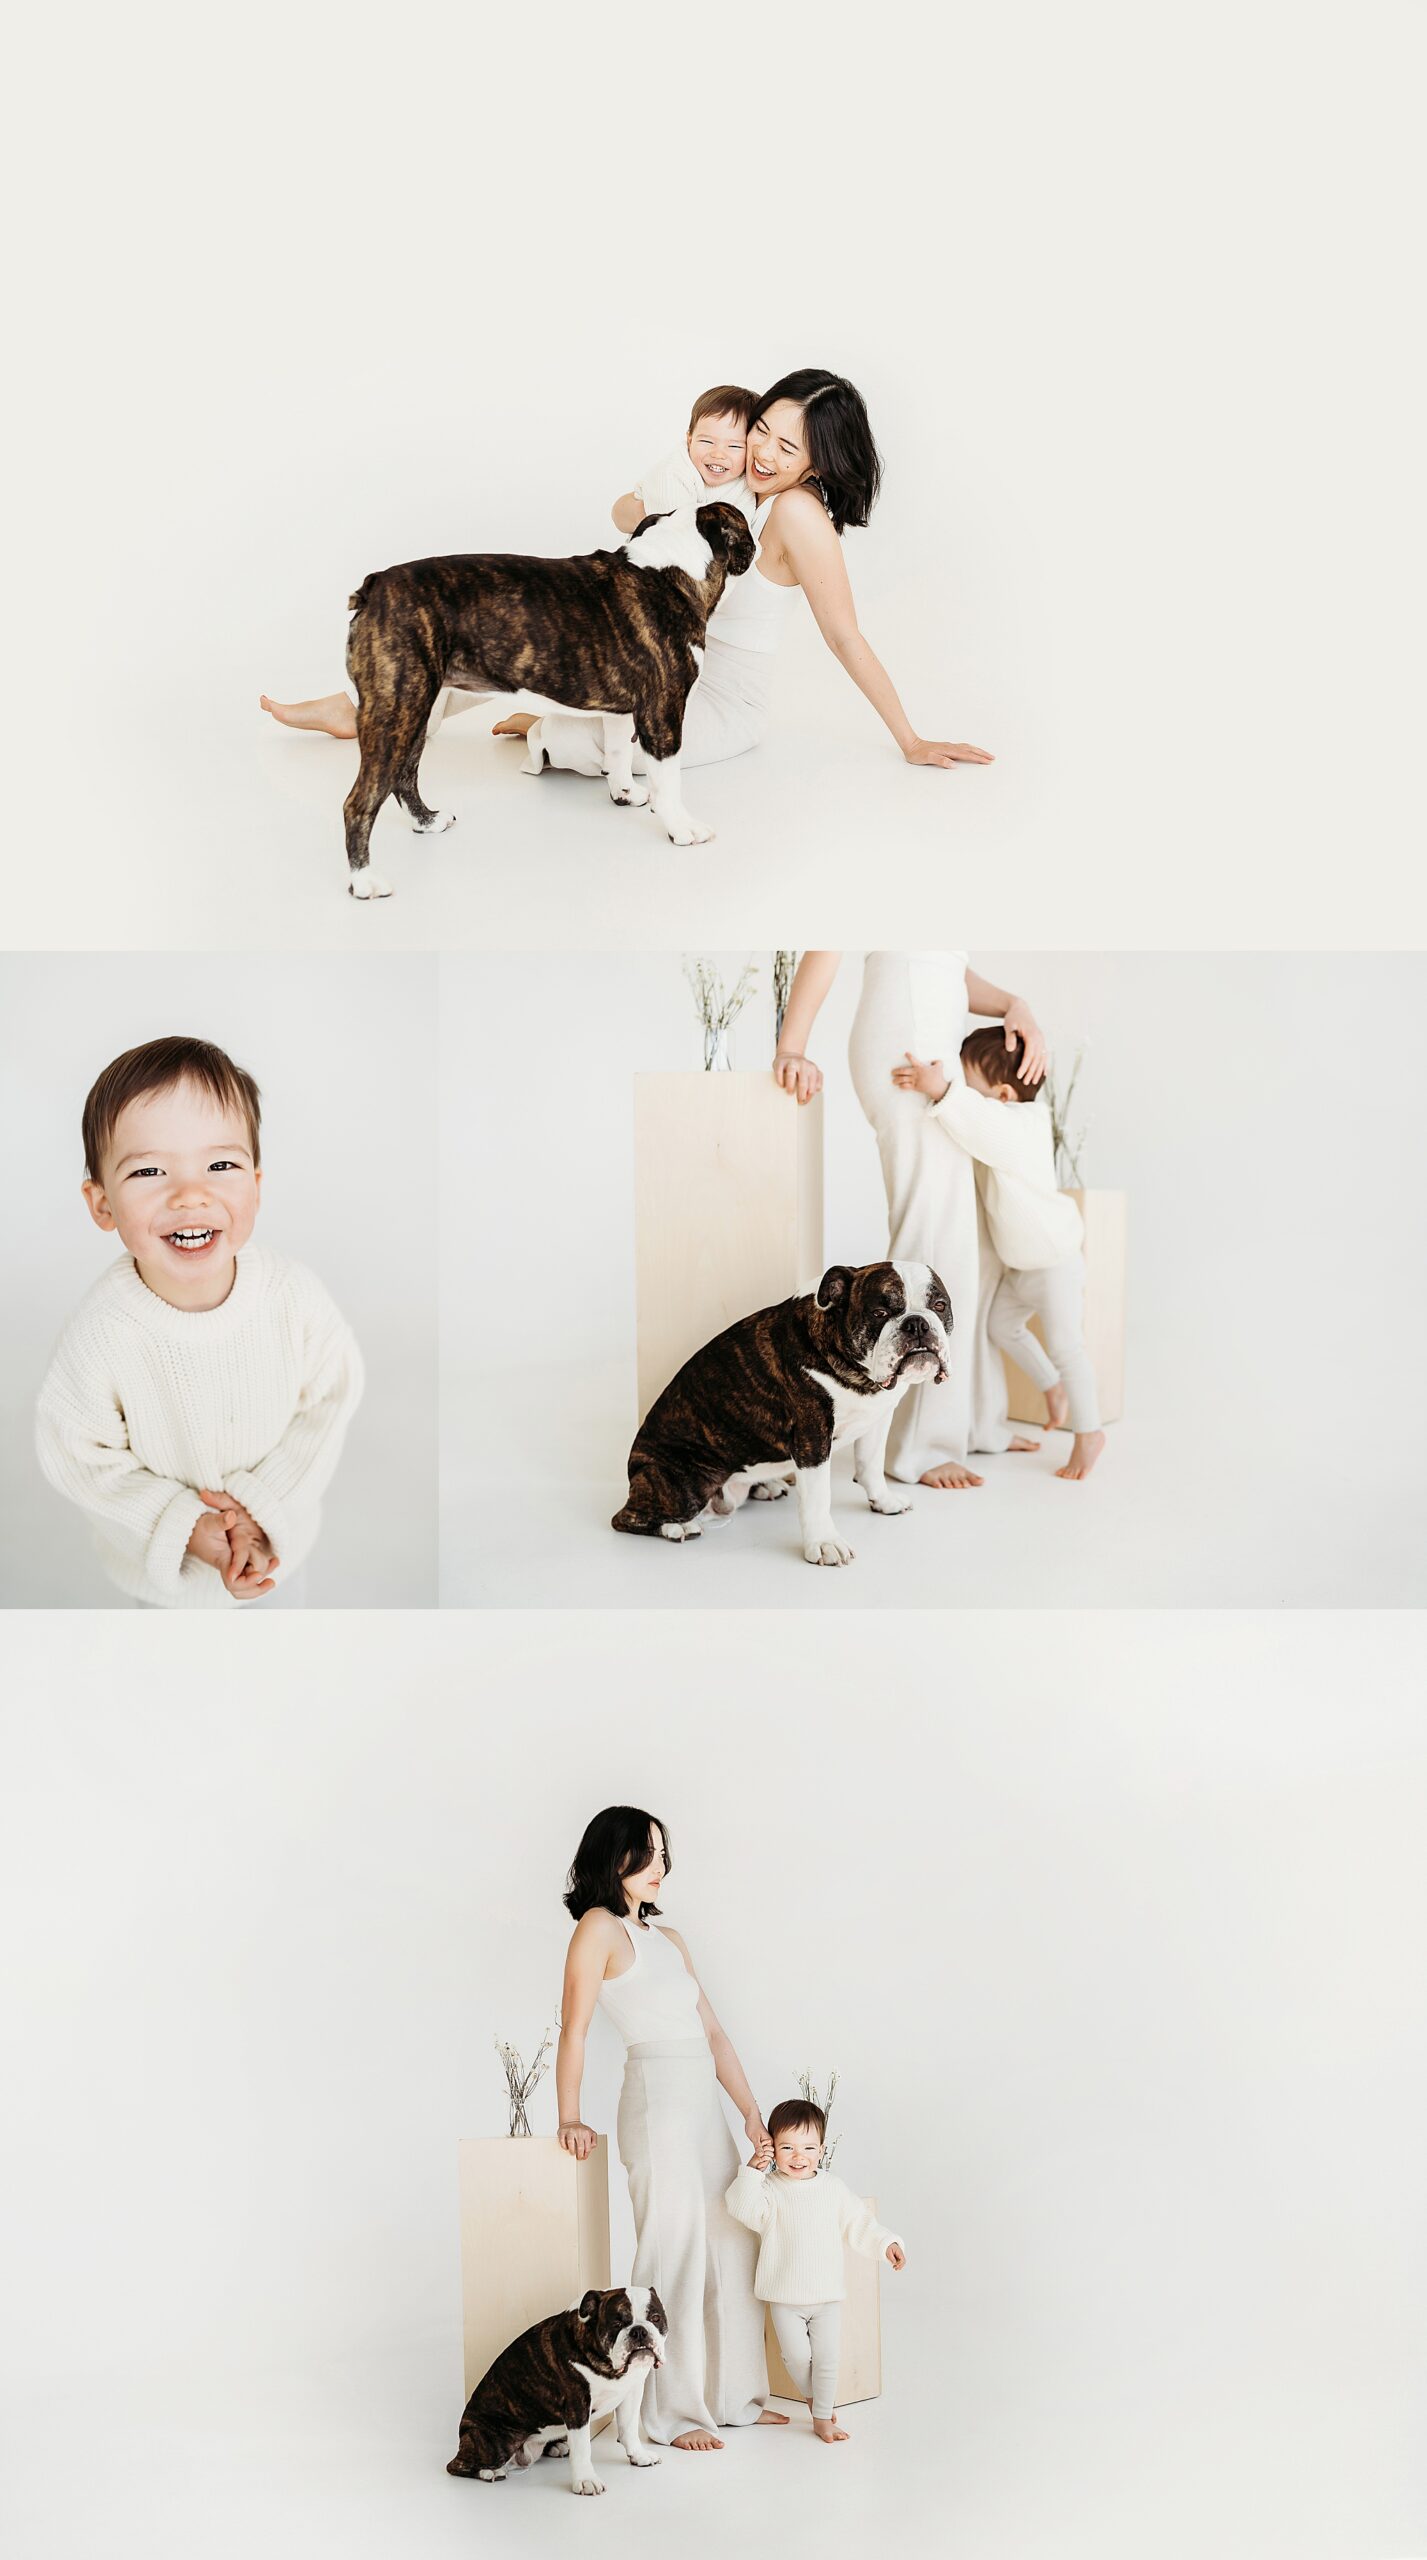 alex morris design, maternity and family photography studio, realm